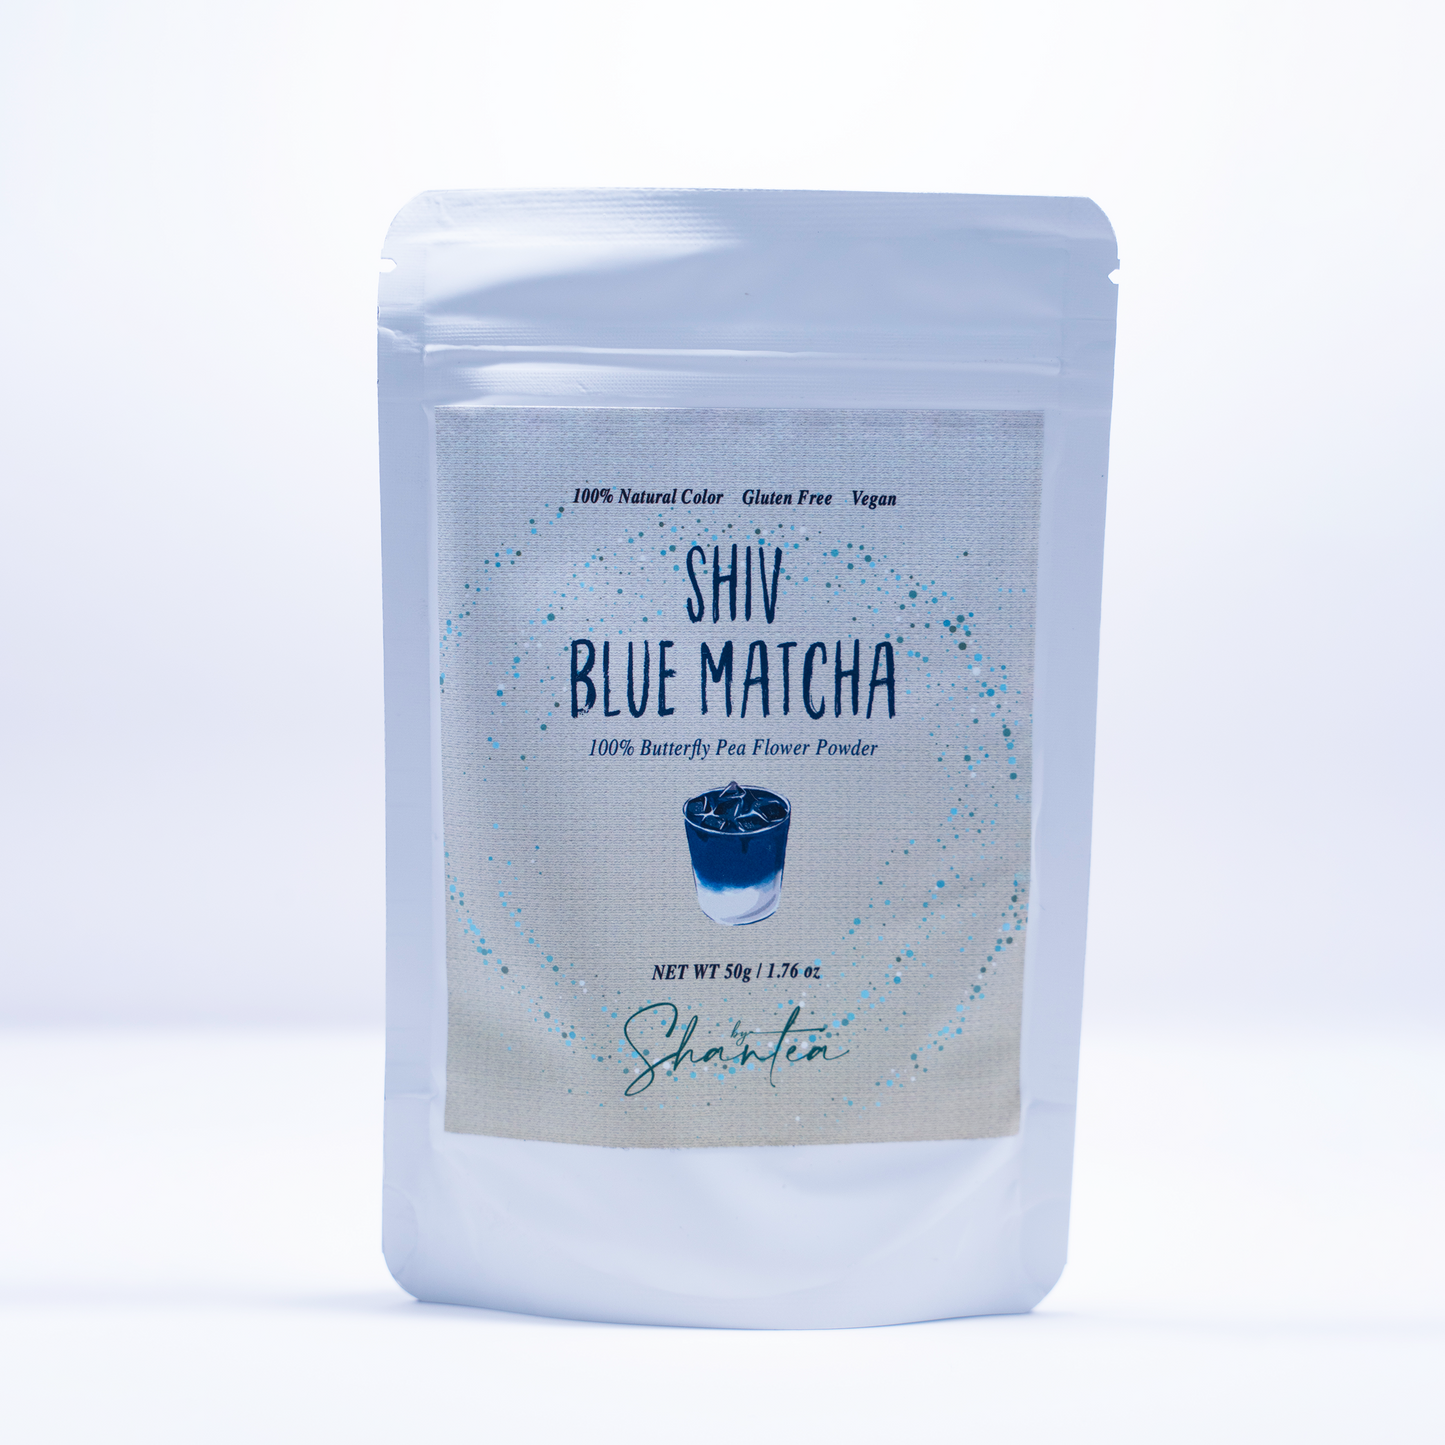 Blue Matcha (Butterfly Pea Flower Powder) - 70 serving per package - All Natural